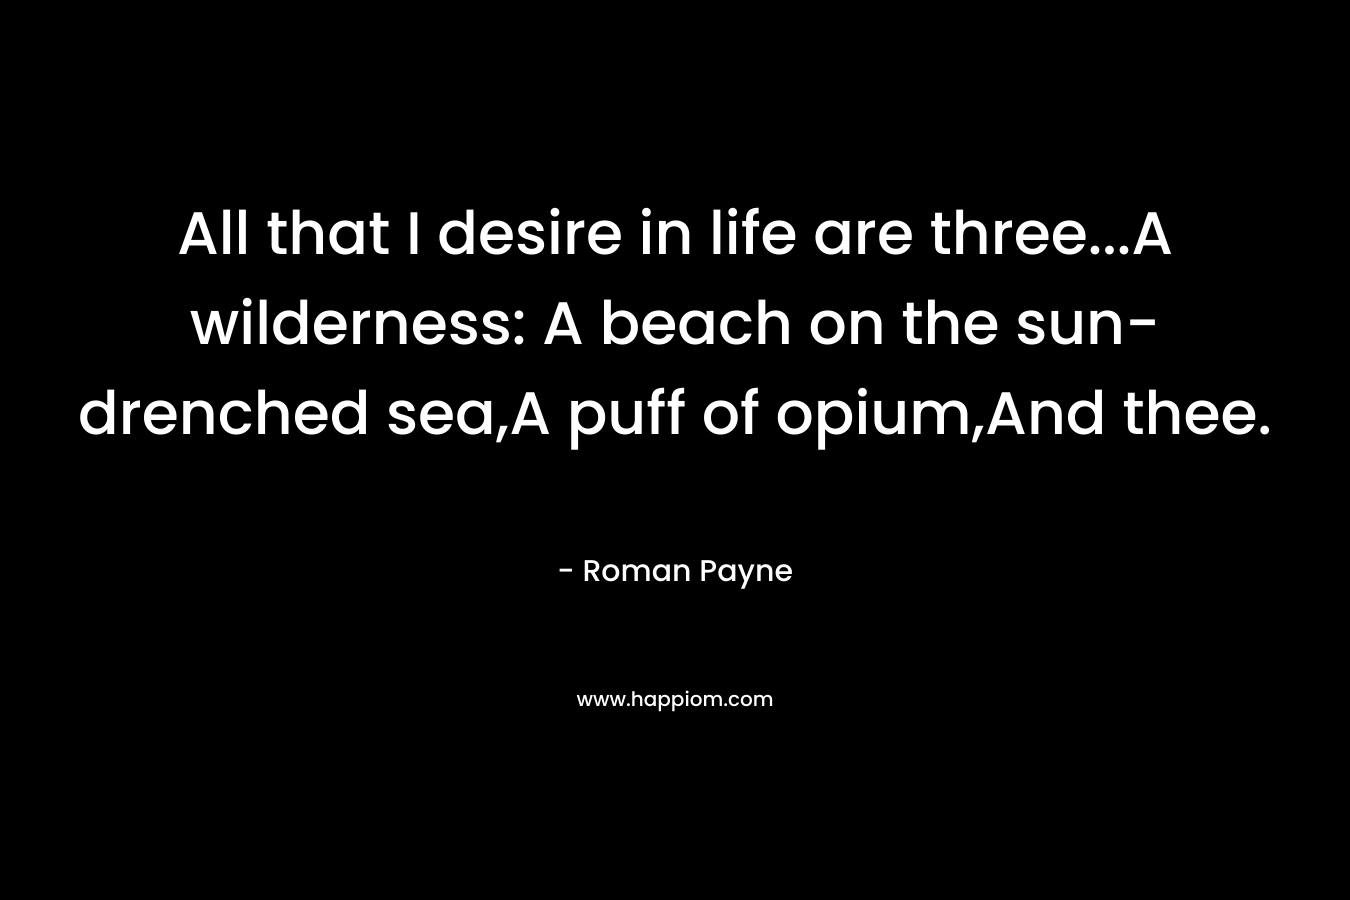 All that I desire in life are three...A wilderness: A beach on the sun-drenched sea,A puff of opium,And thee.